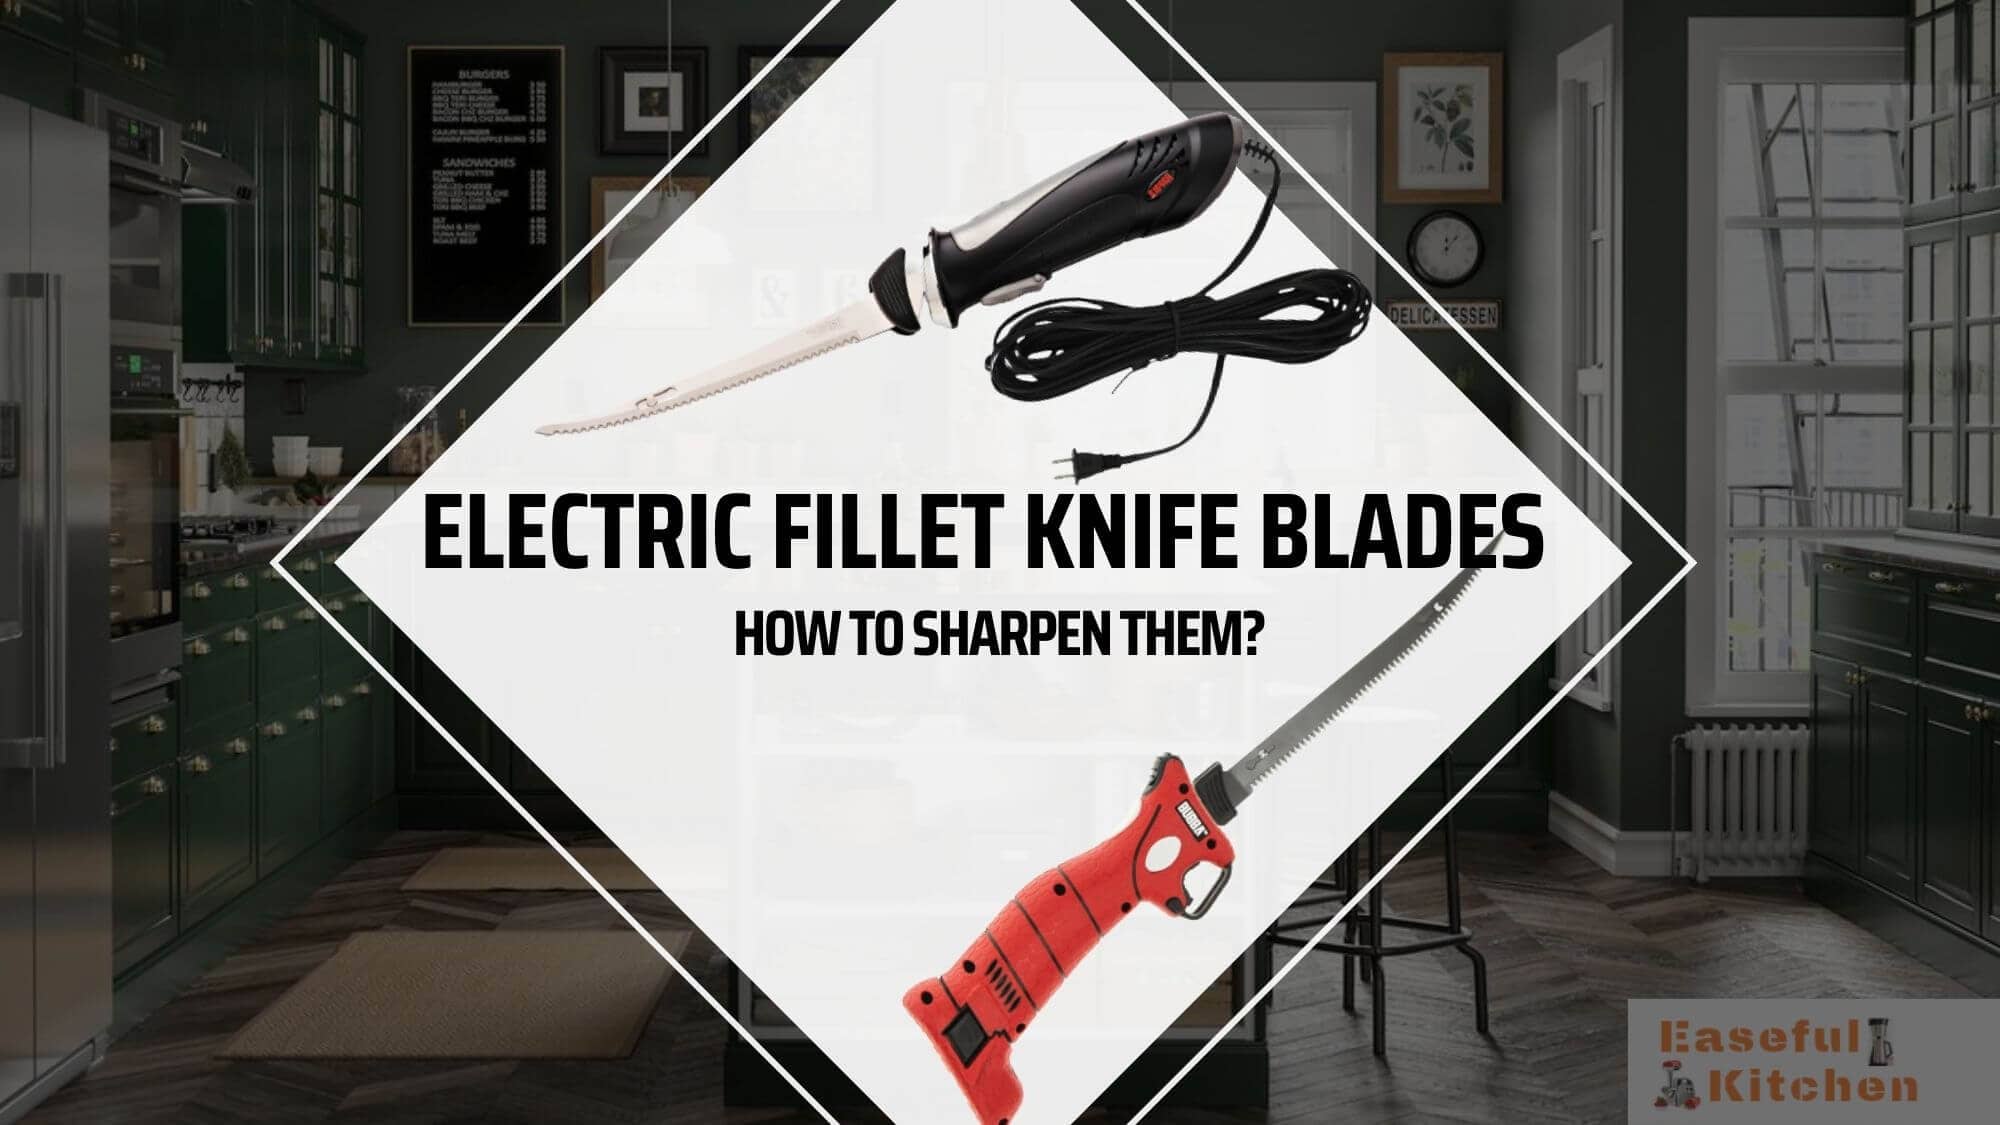 How to Sharpen Electric Fillet Knife Blades